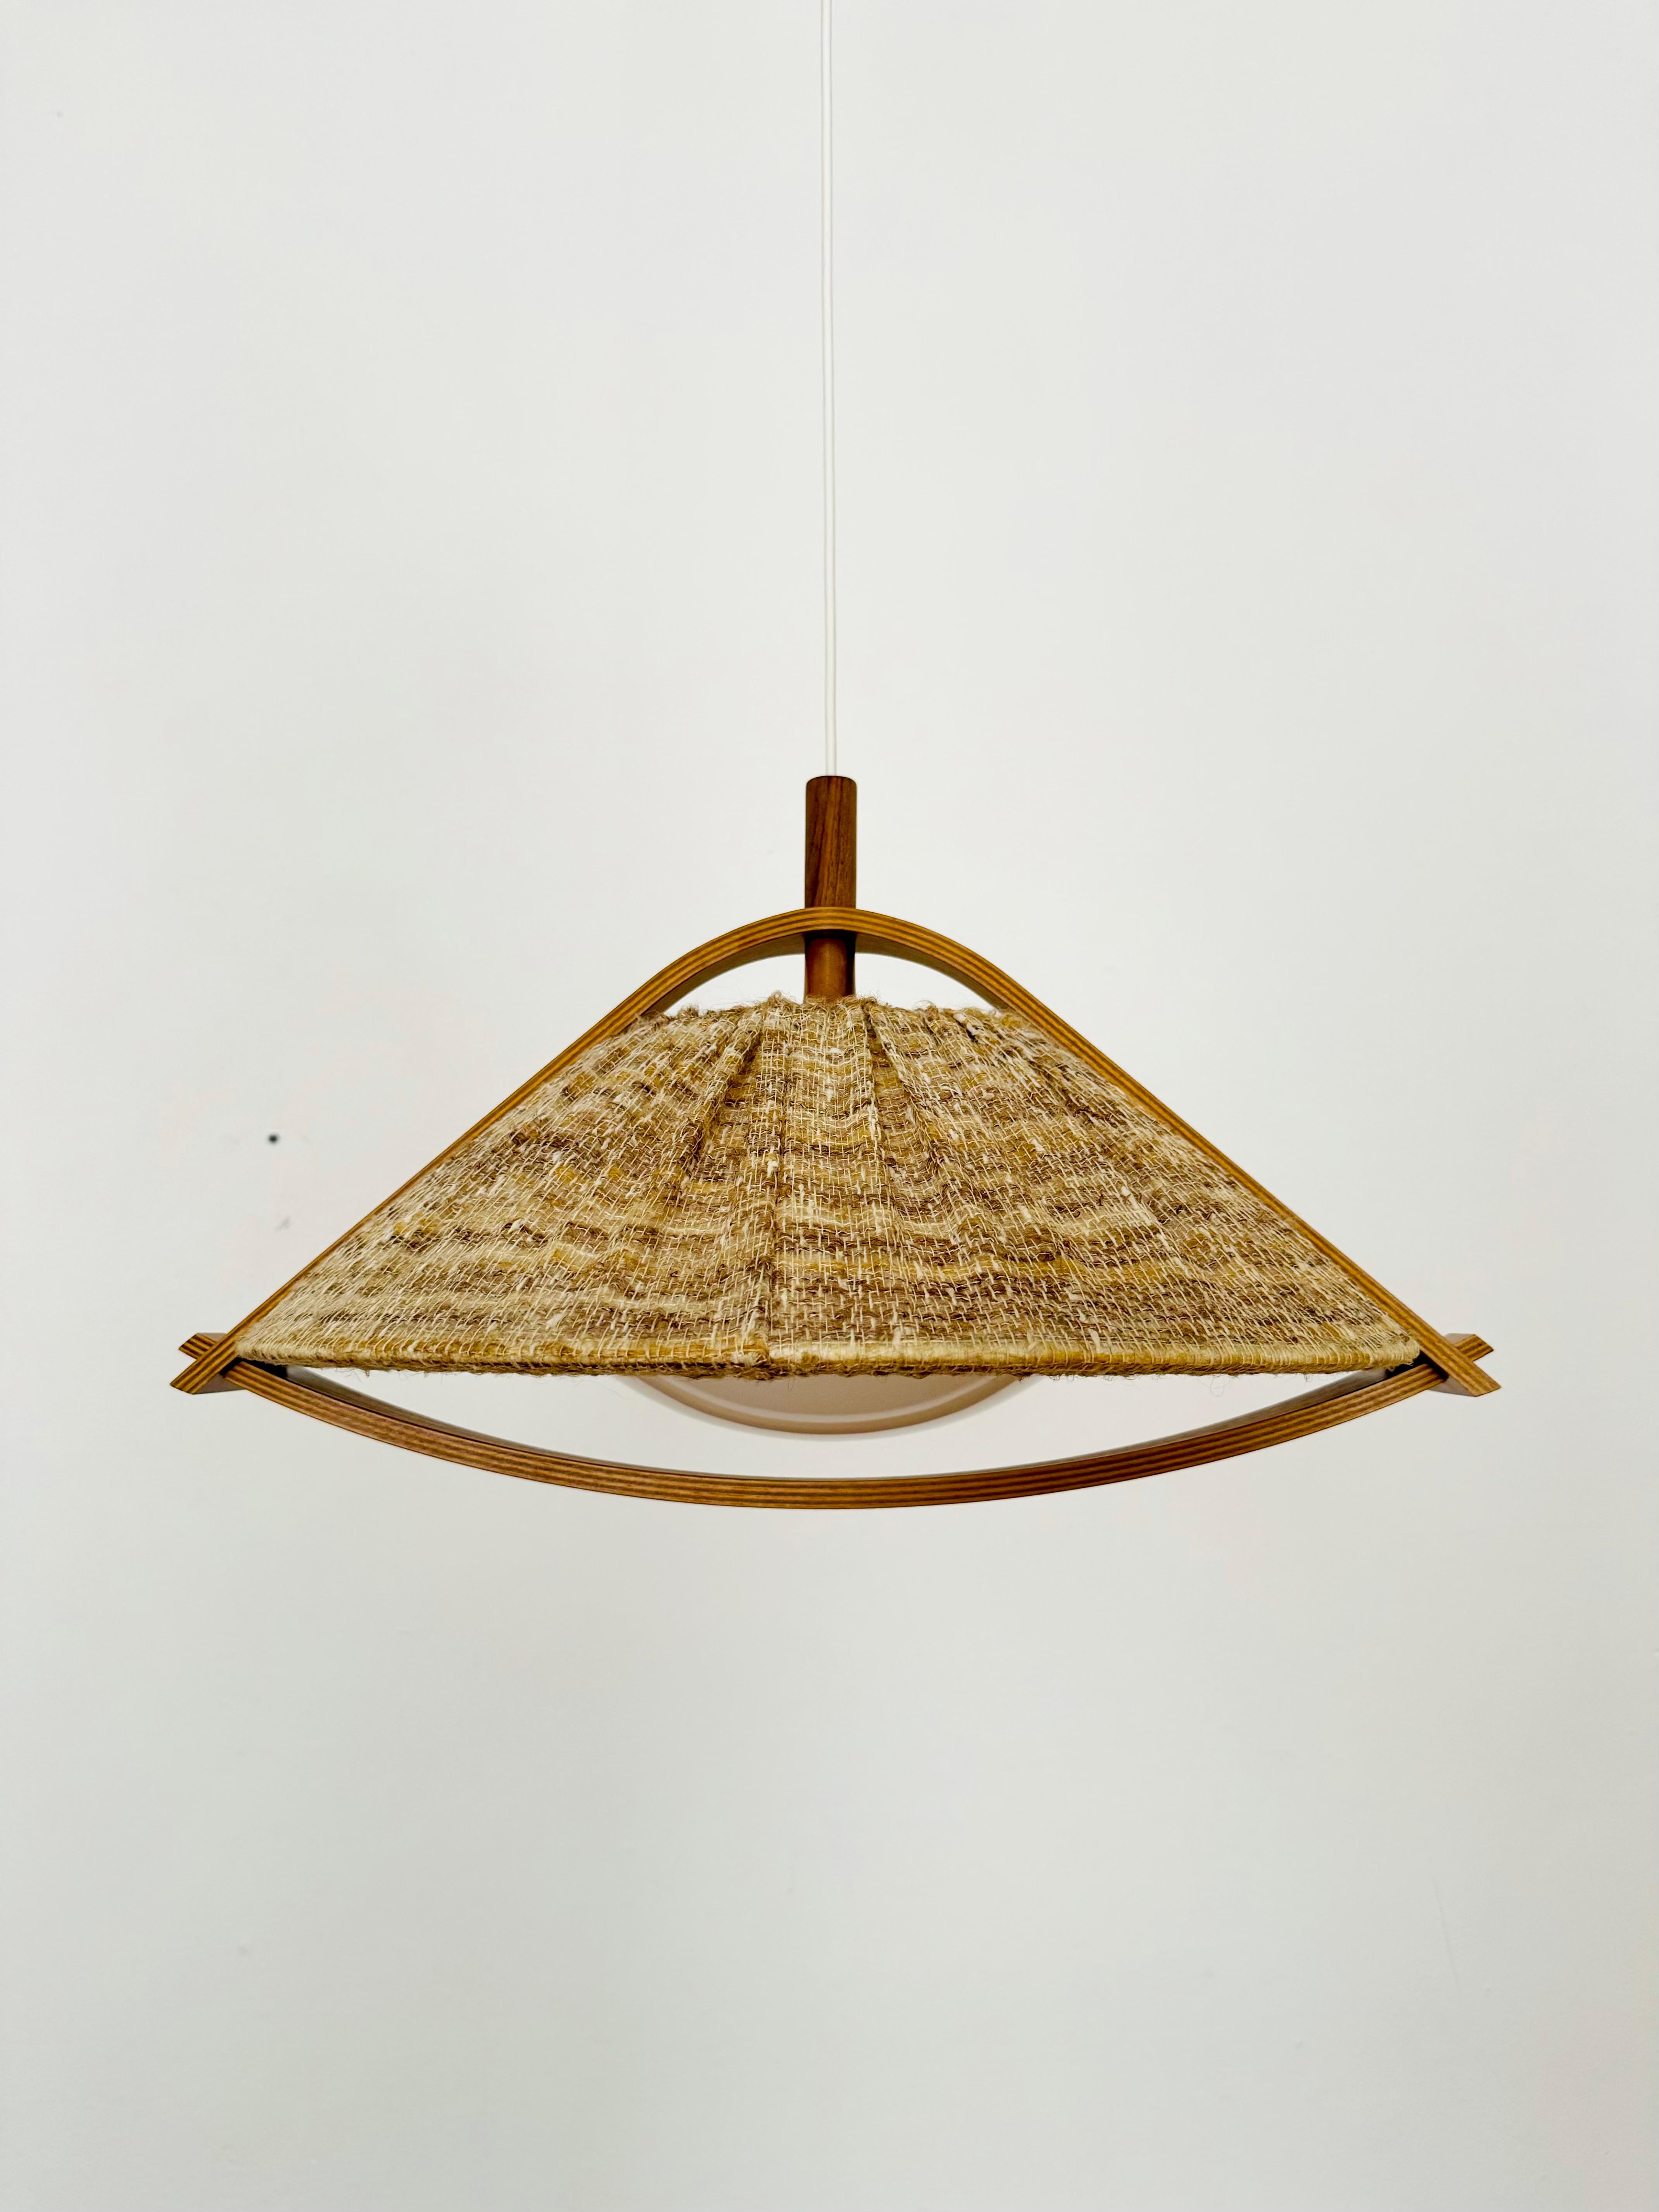 Exceptionally beautiful and large pendant lamp from the 1960s.
The design is very unusual.
The shape and materials create a warm and very pleasant light.

Condition:

Very good vintage condition with slight signs of age-related wear.
The lampshade